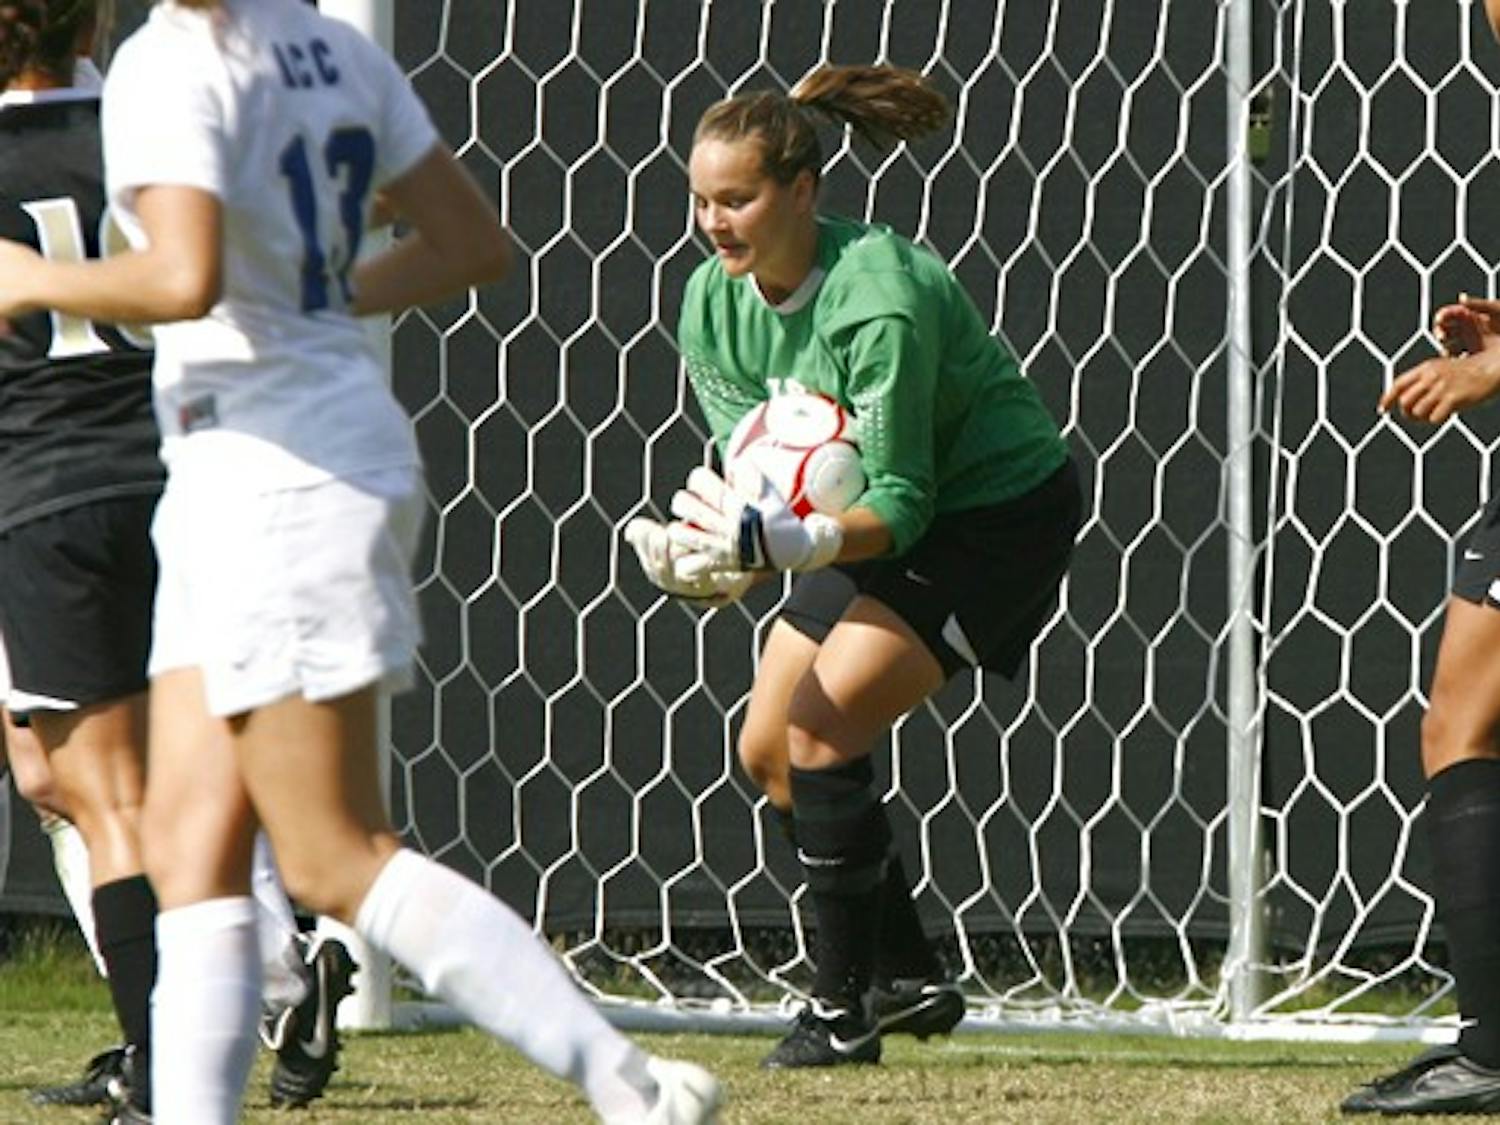 Freshman goalkeeper Tara Campbell made eight saves as the Blue Devils played No. 5 Florida State to a scoreless tie Sunday.